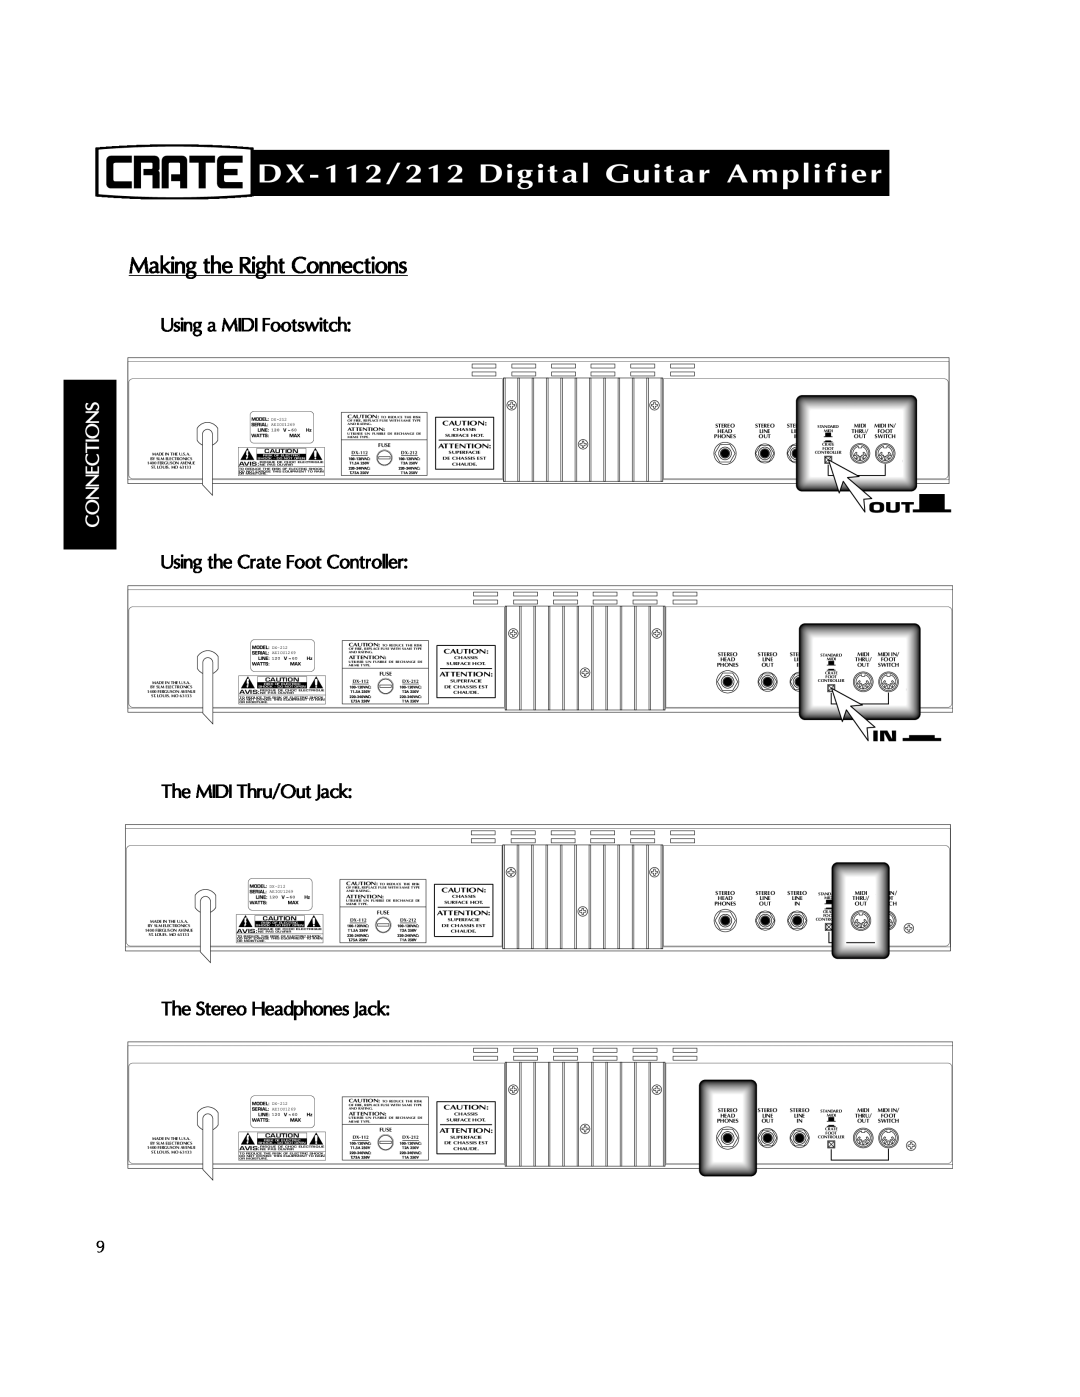 Crate Amplifiers manual DX-112/212Digital Guitar Amplifier, Making the Right Connections, MODEL D-112/212, Serial#, Fuse 